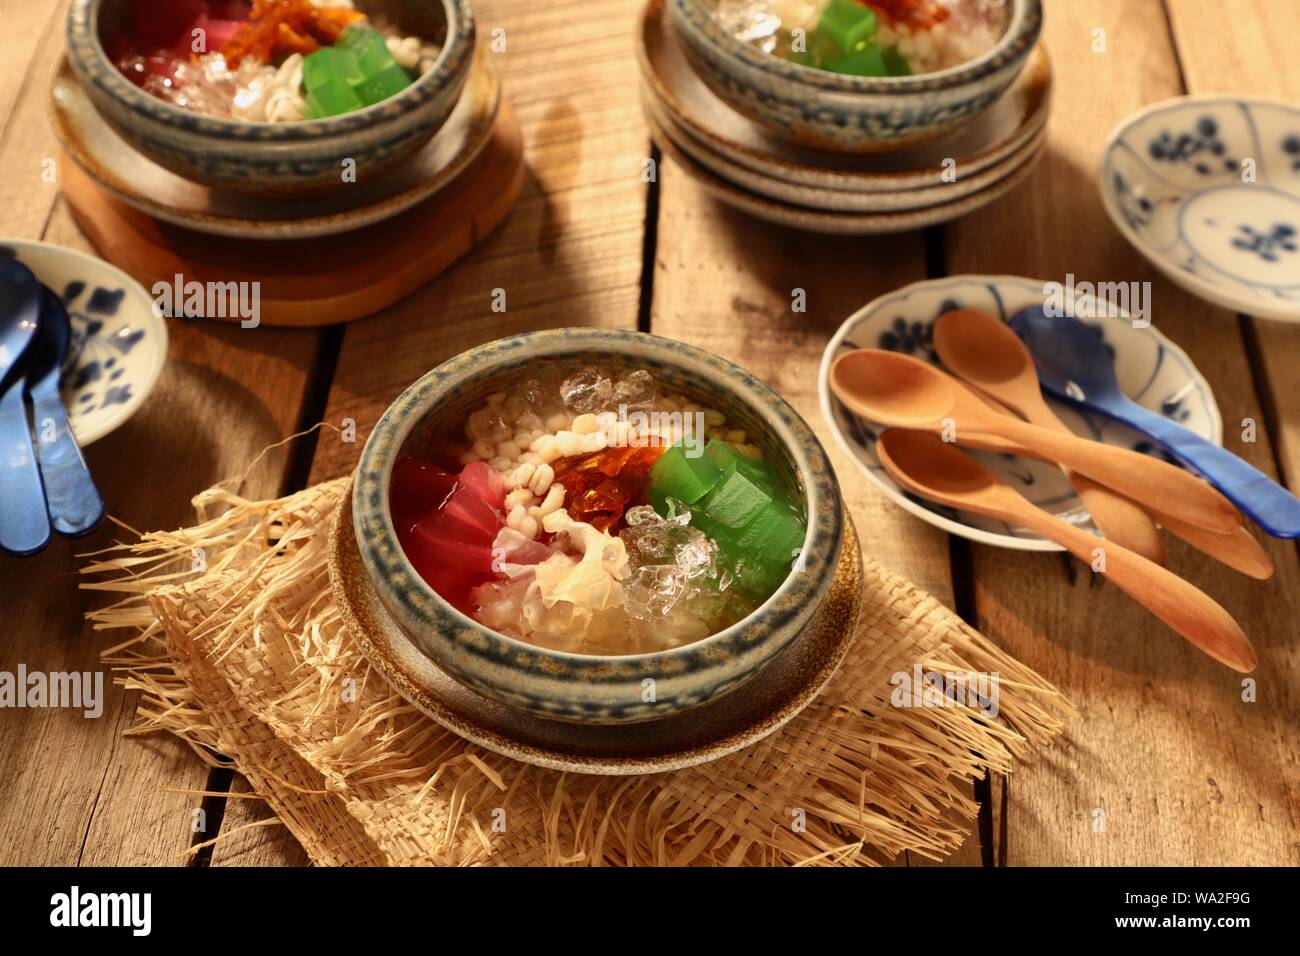 Es Sekoteng Medan. Cooling dessert cocktail of barley, palm fruit, white fungus, agar jelly, and preserved kumquat with crushed ice in sugar water. Stock Photo